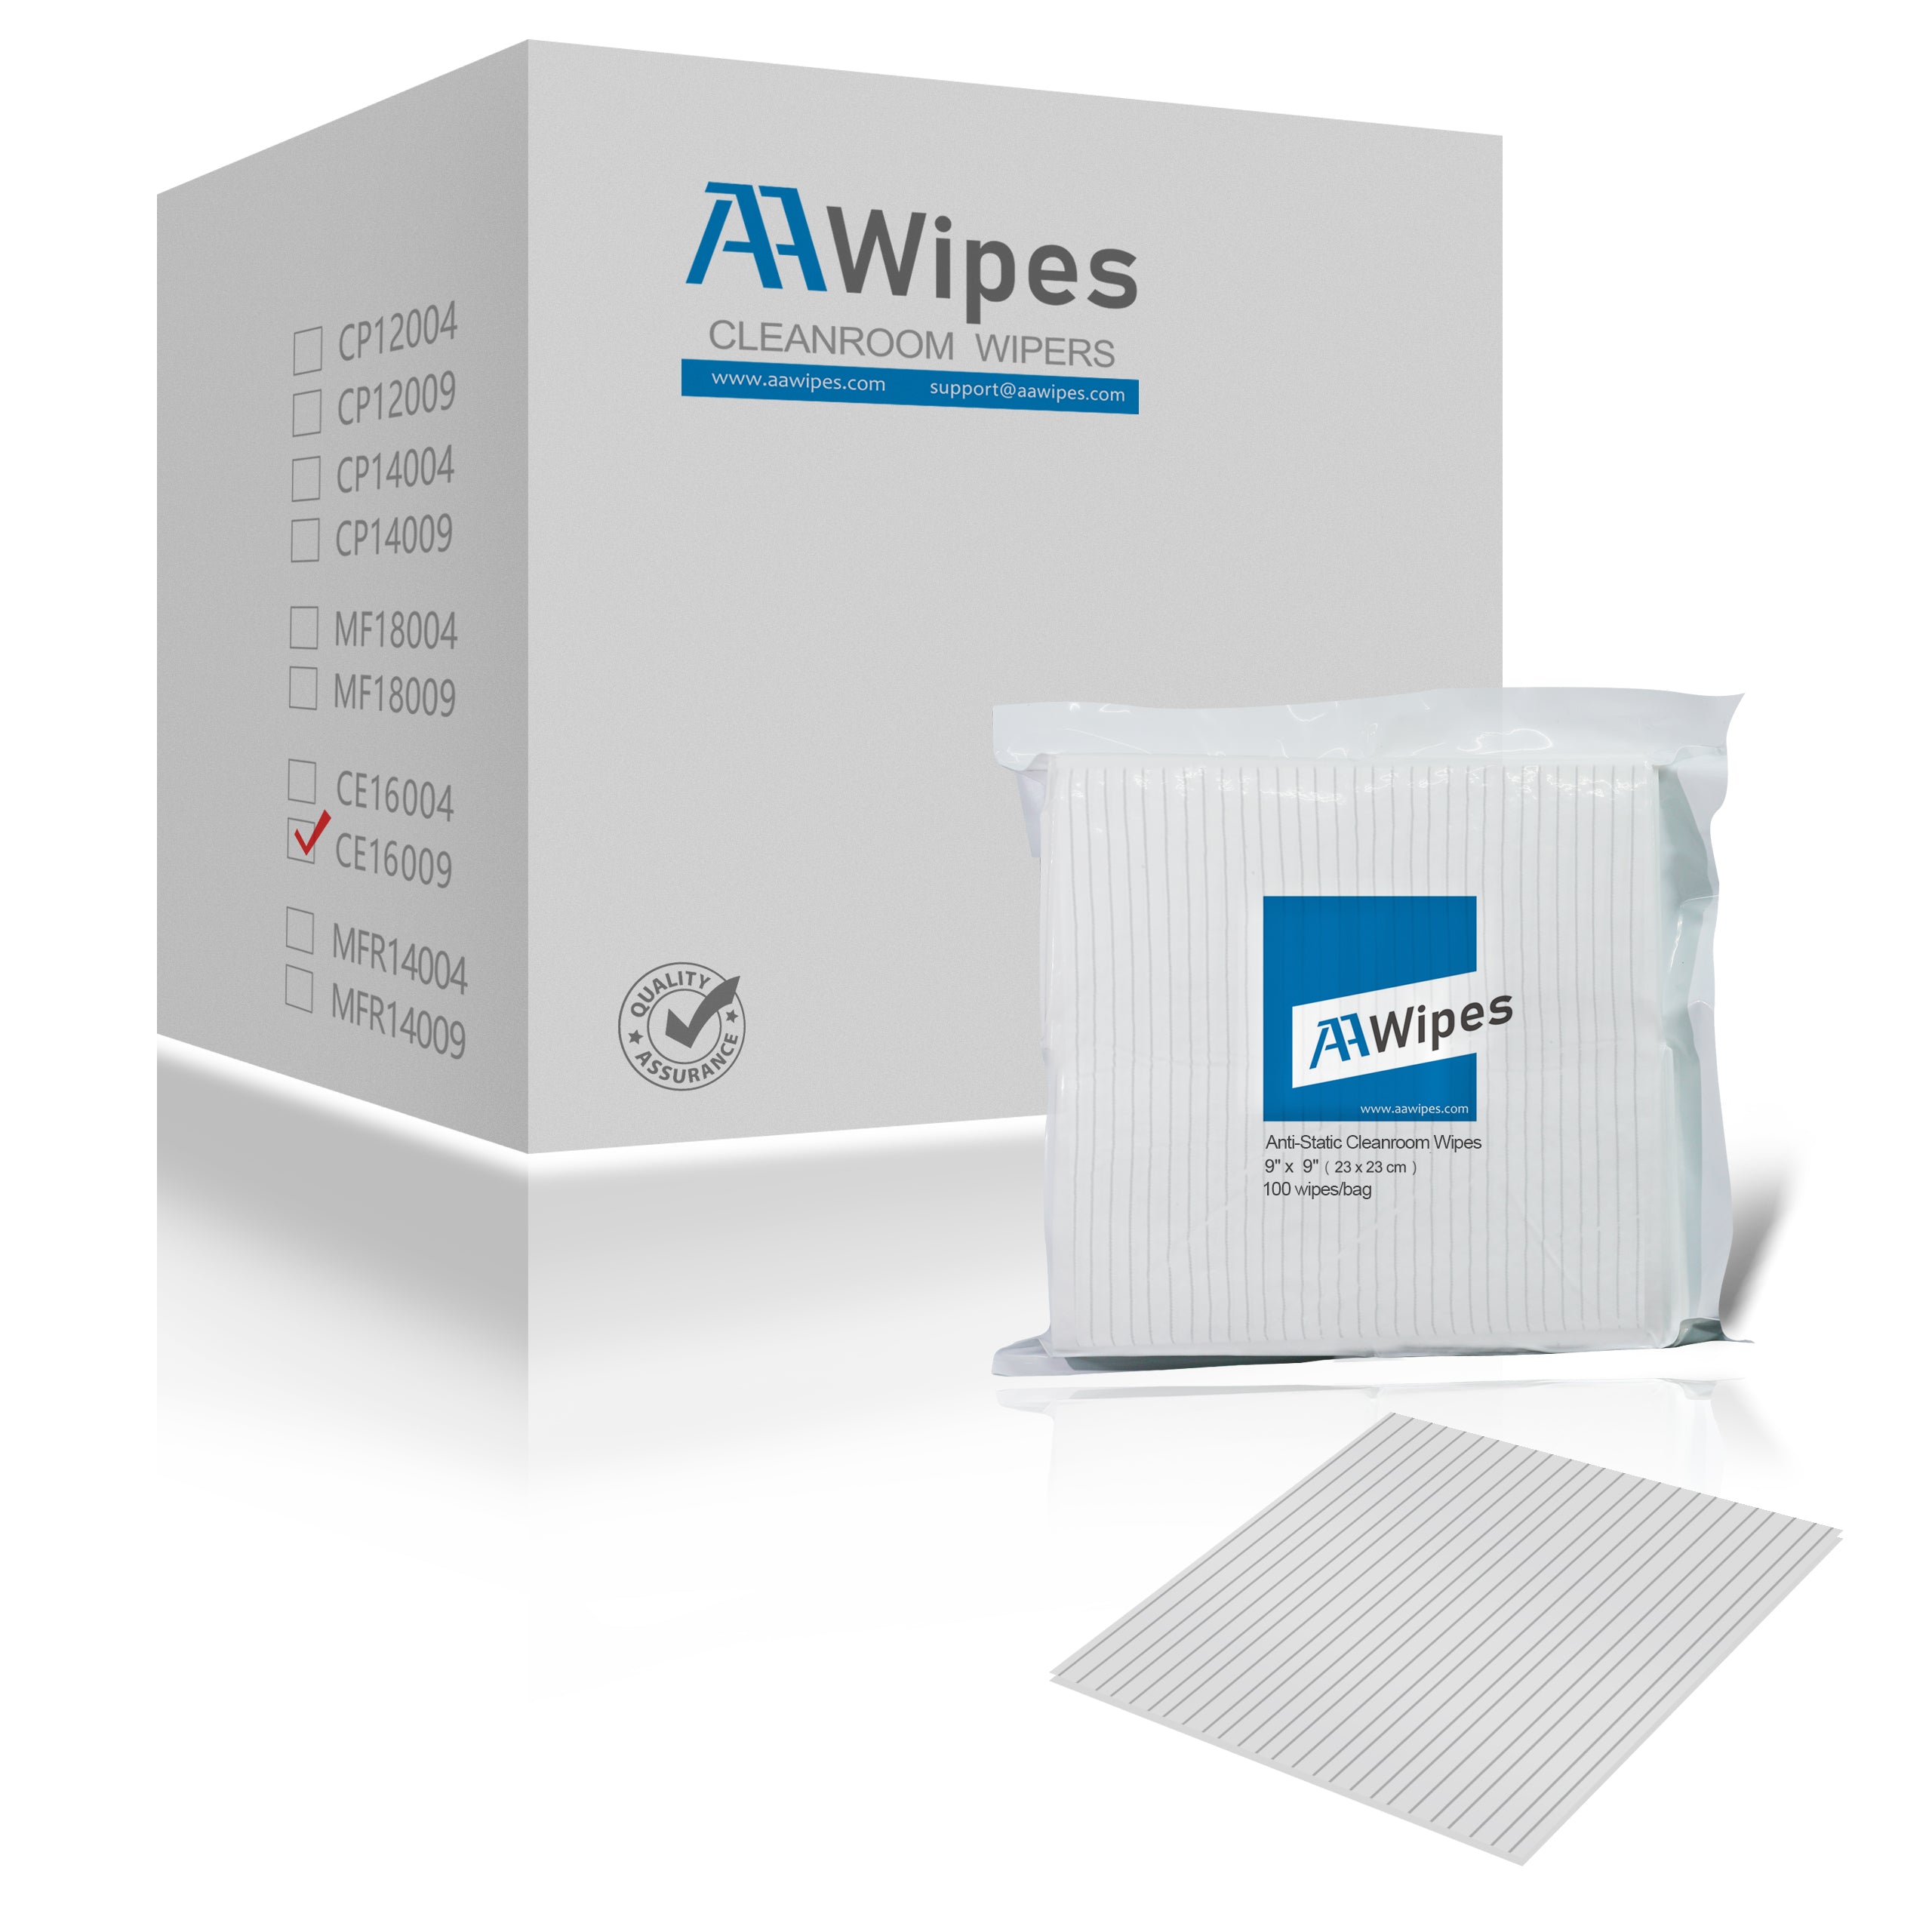 Lint-free Wiper Electronic Compoment Metal Wiping Anti-Static ESD Wipes 9"x9" for Equipment Maintanence (No. CE16009 100 Bags for MAC)